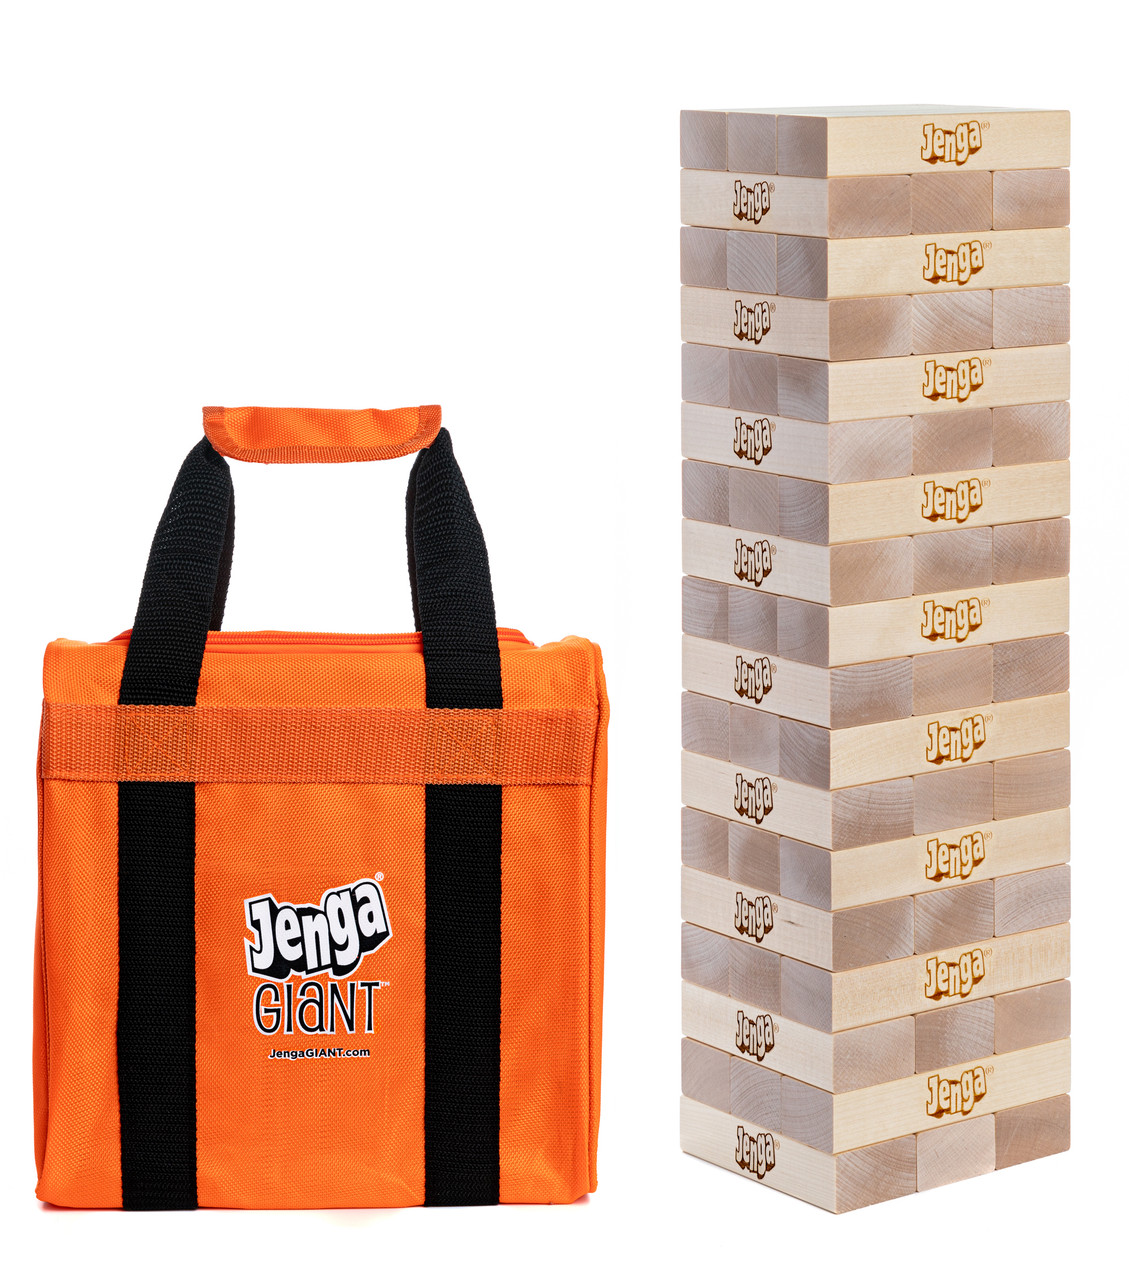 Jenga Giant Family Edition Stacking Game by University Games 